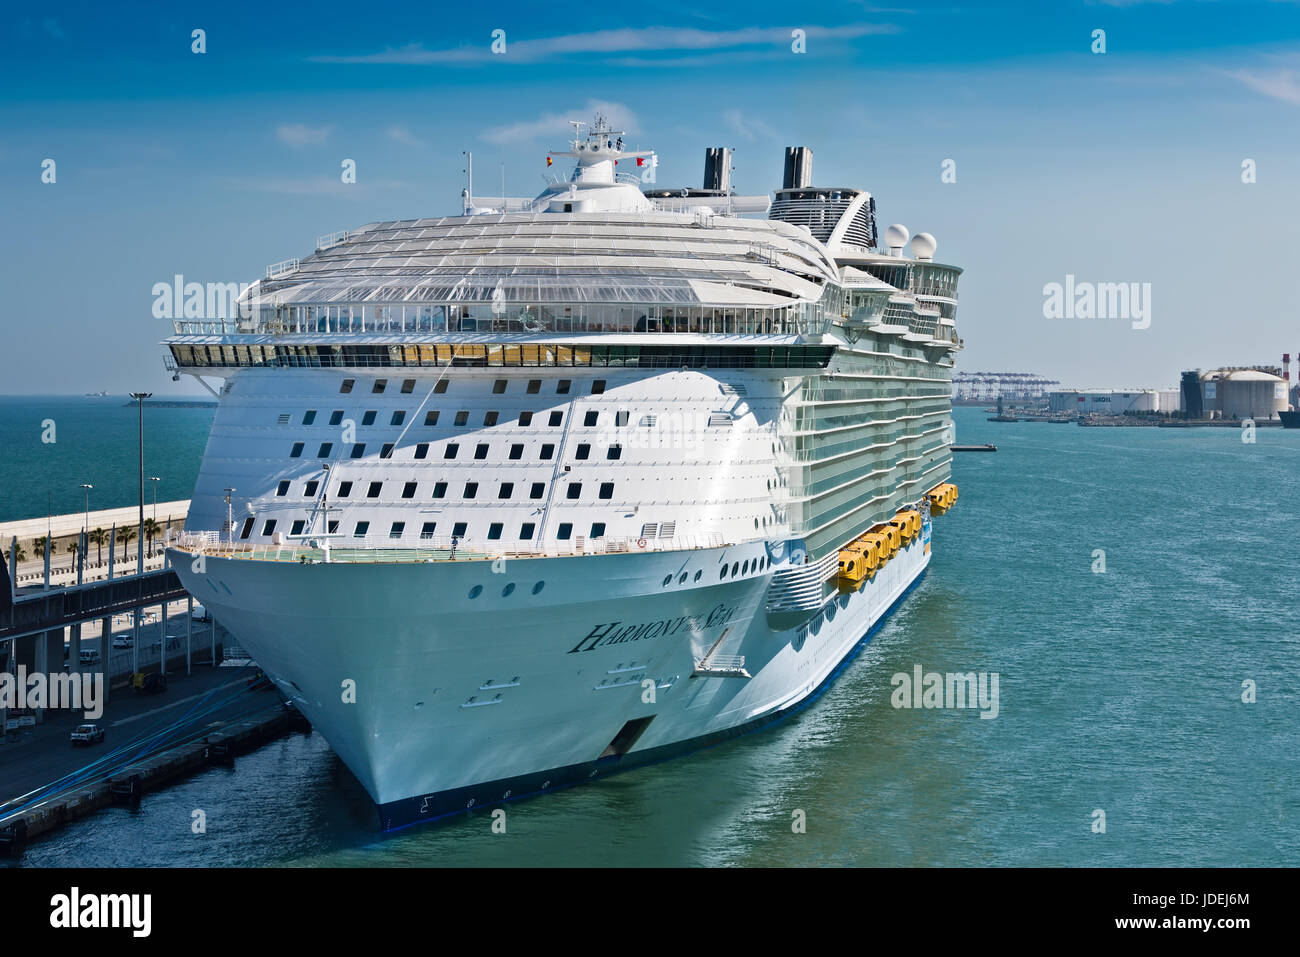 Barcelona, Spain - June 7, 2016:  Royal Caribbean's, Harmony of the Seas, is now the largest ship in the world, with a gross tonnage of 226,963. Stock Photo